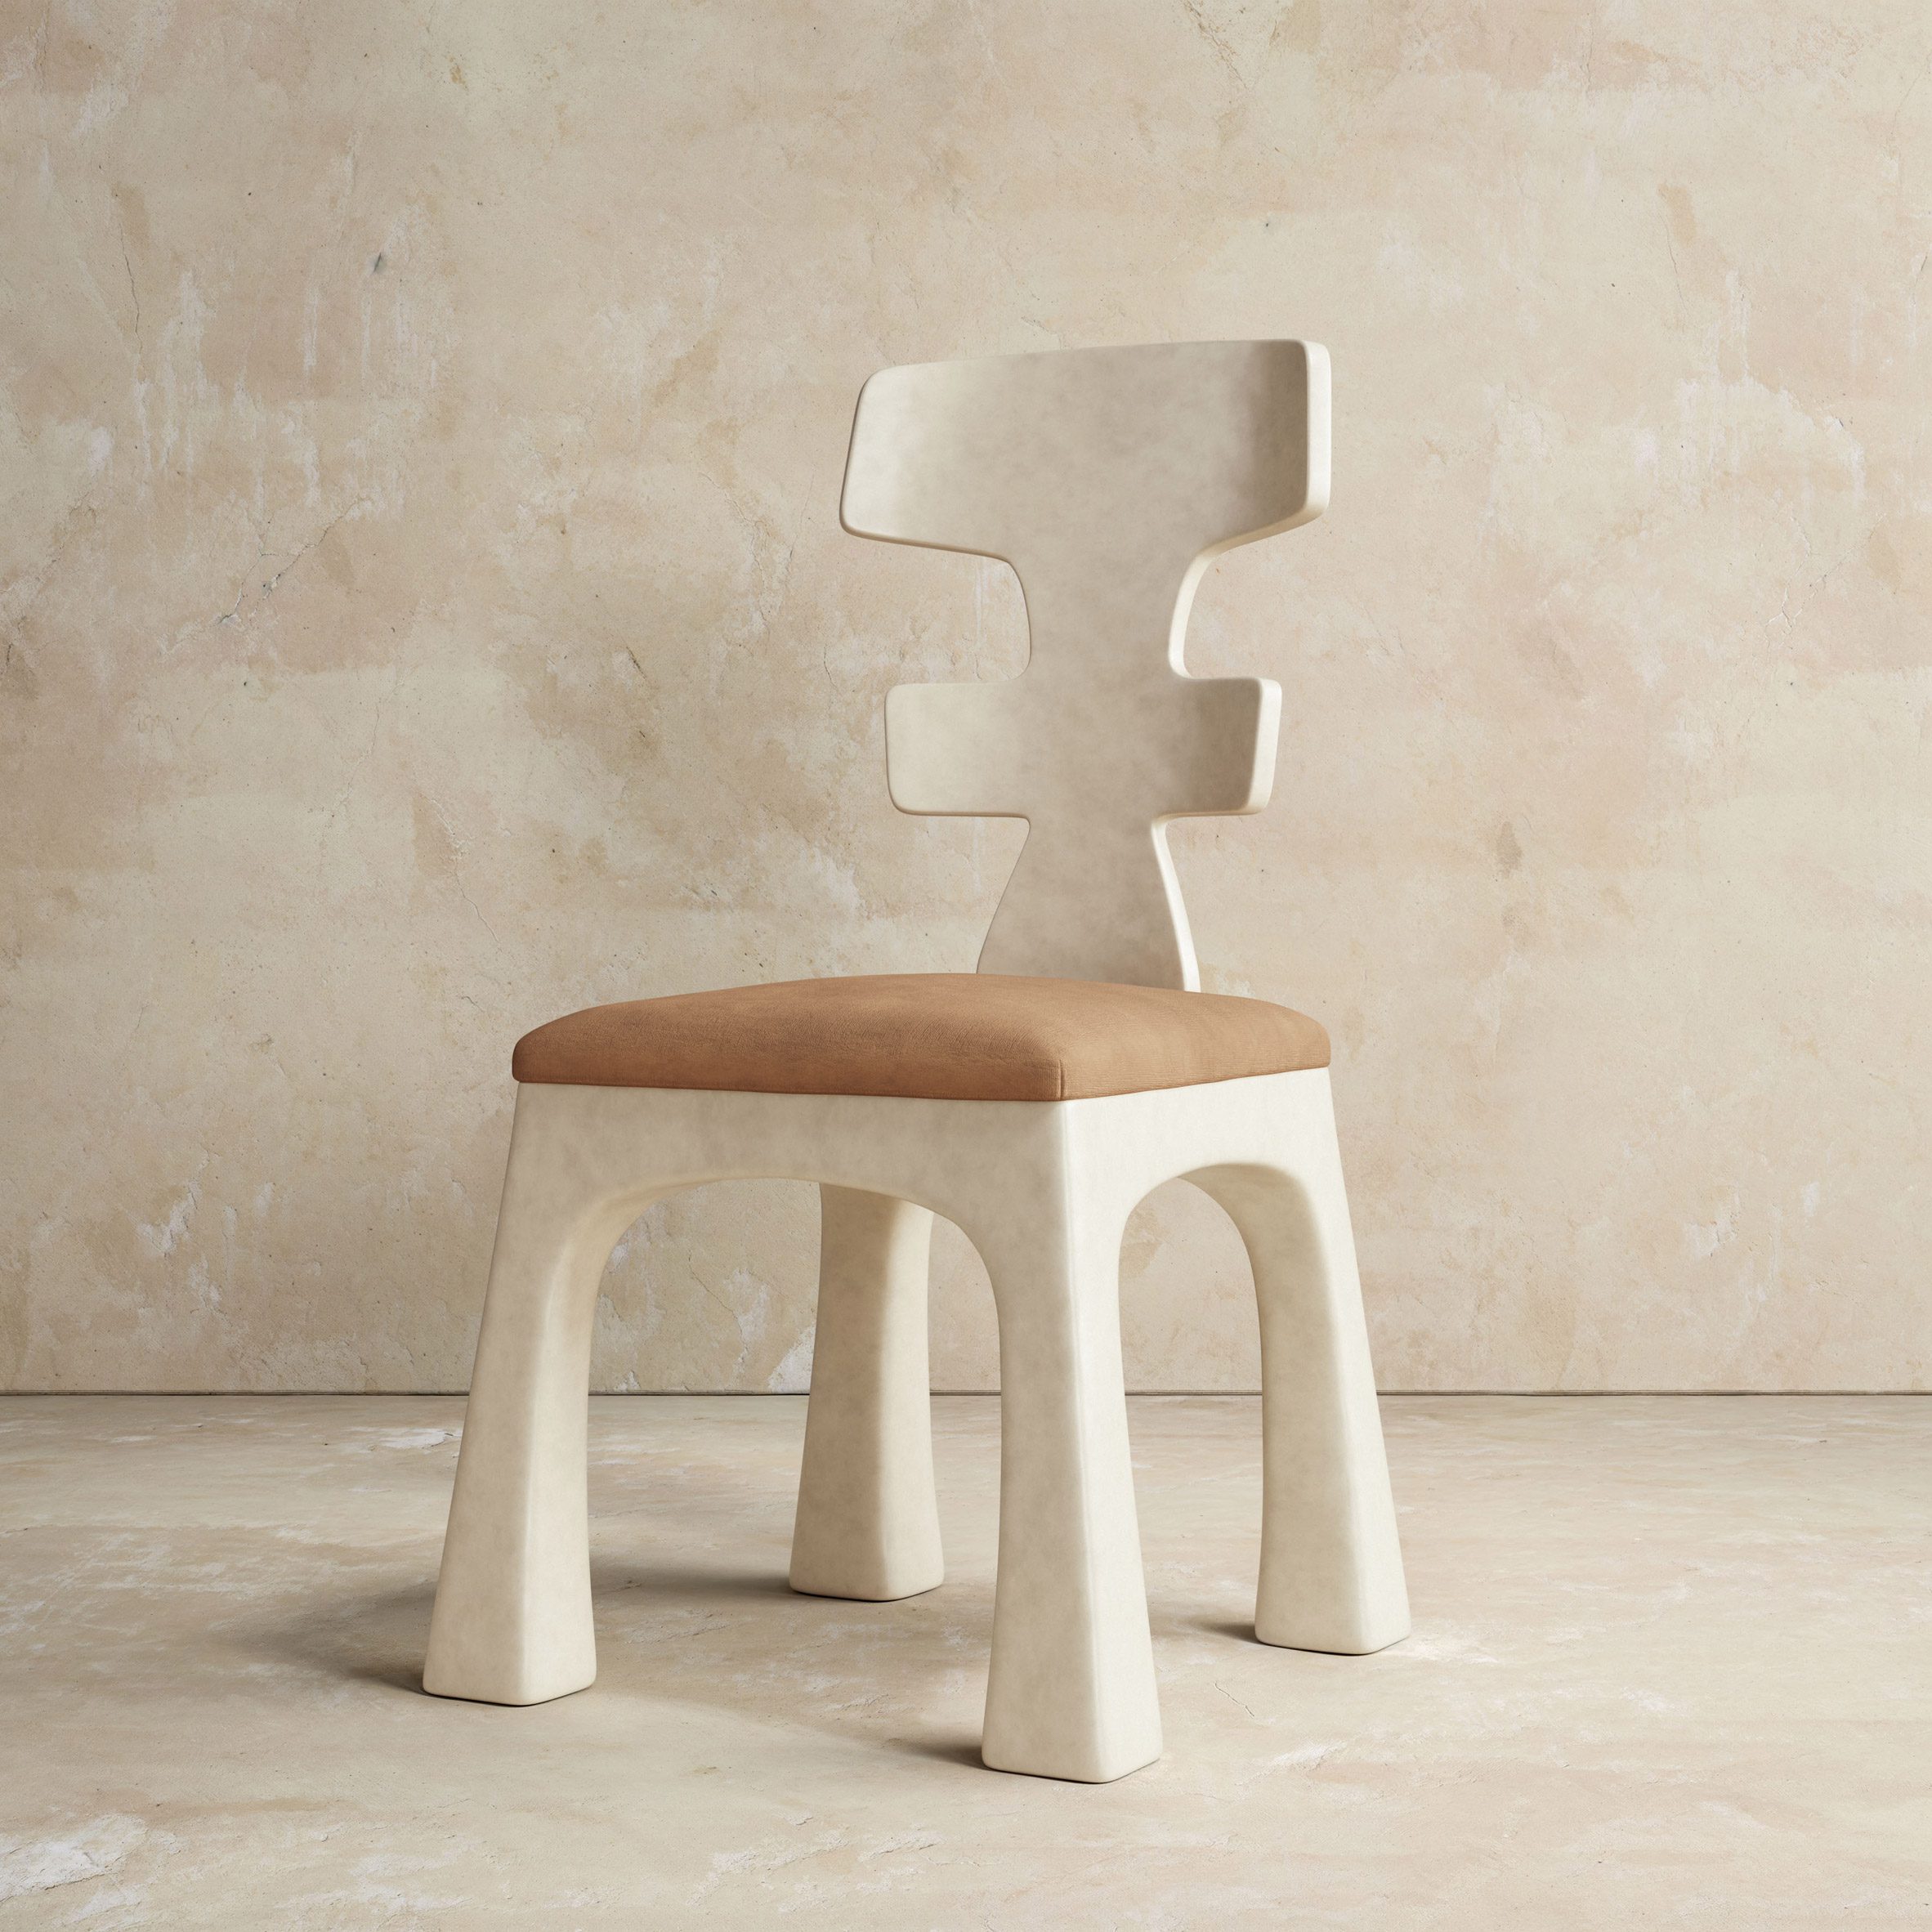 Samba dining chair by Aguirre